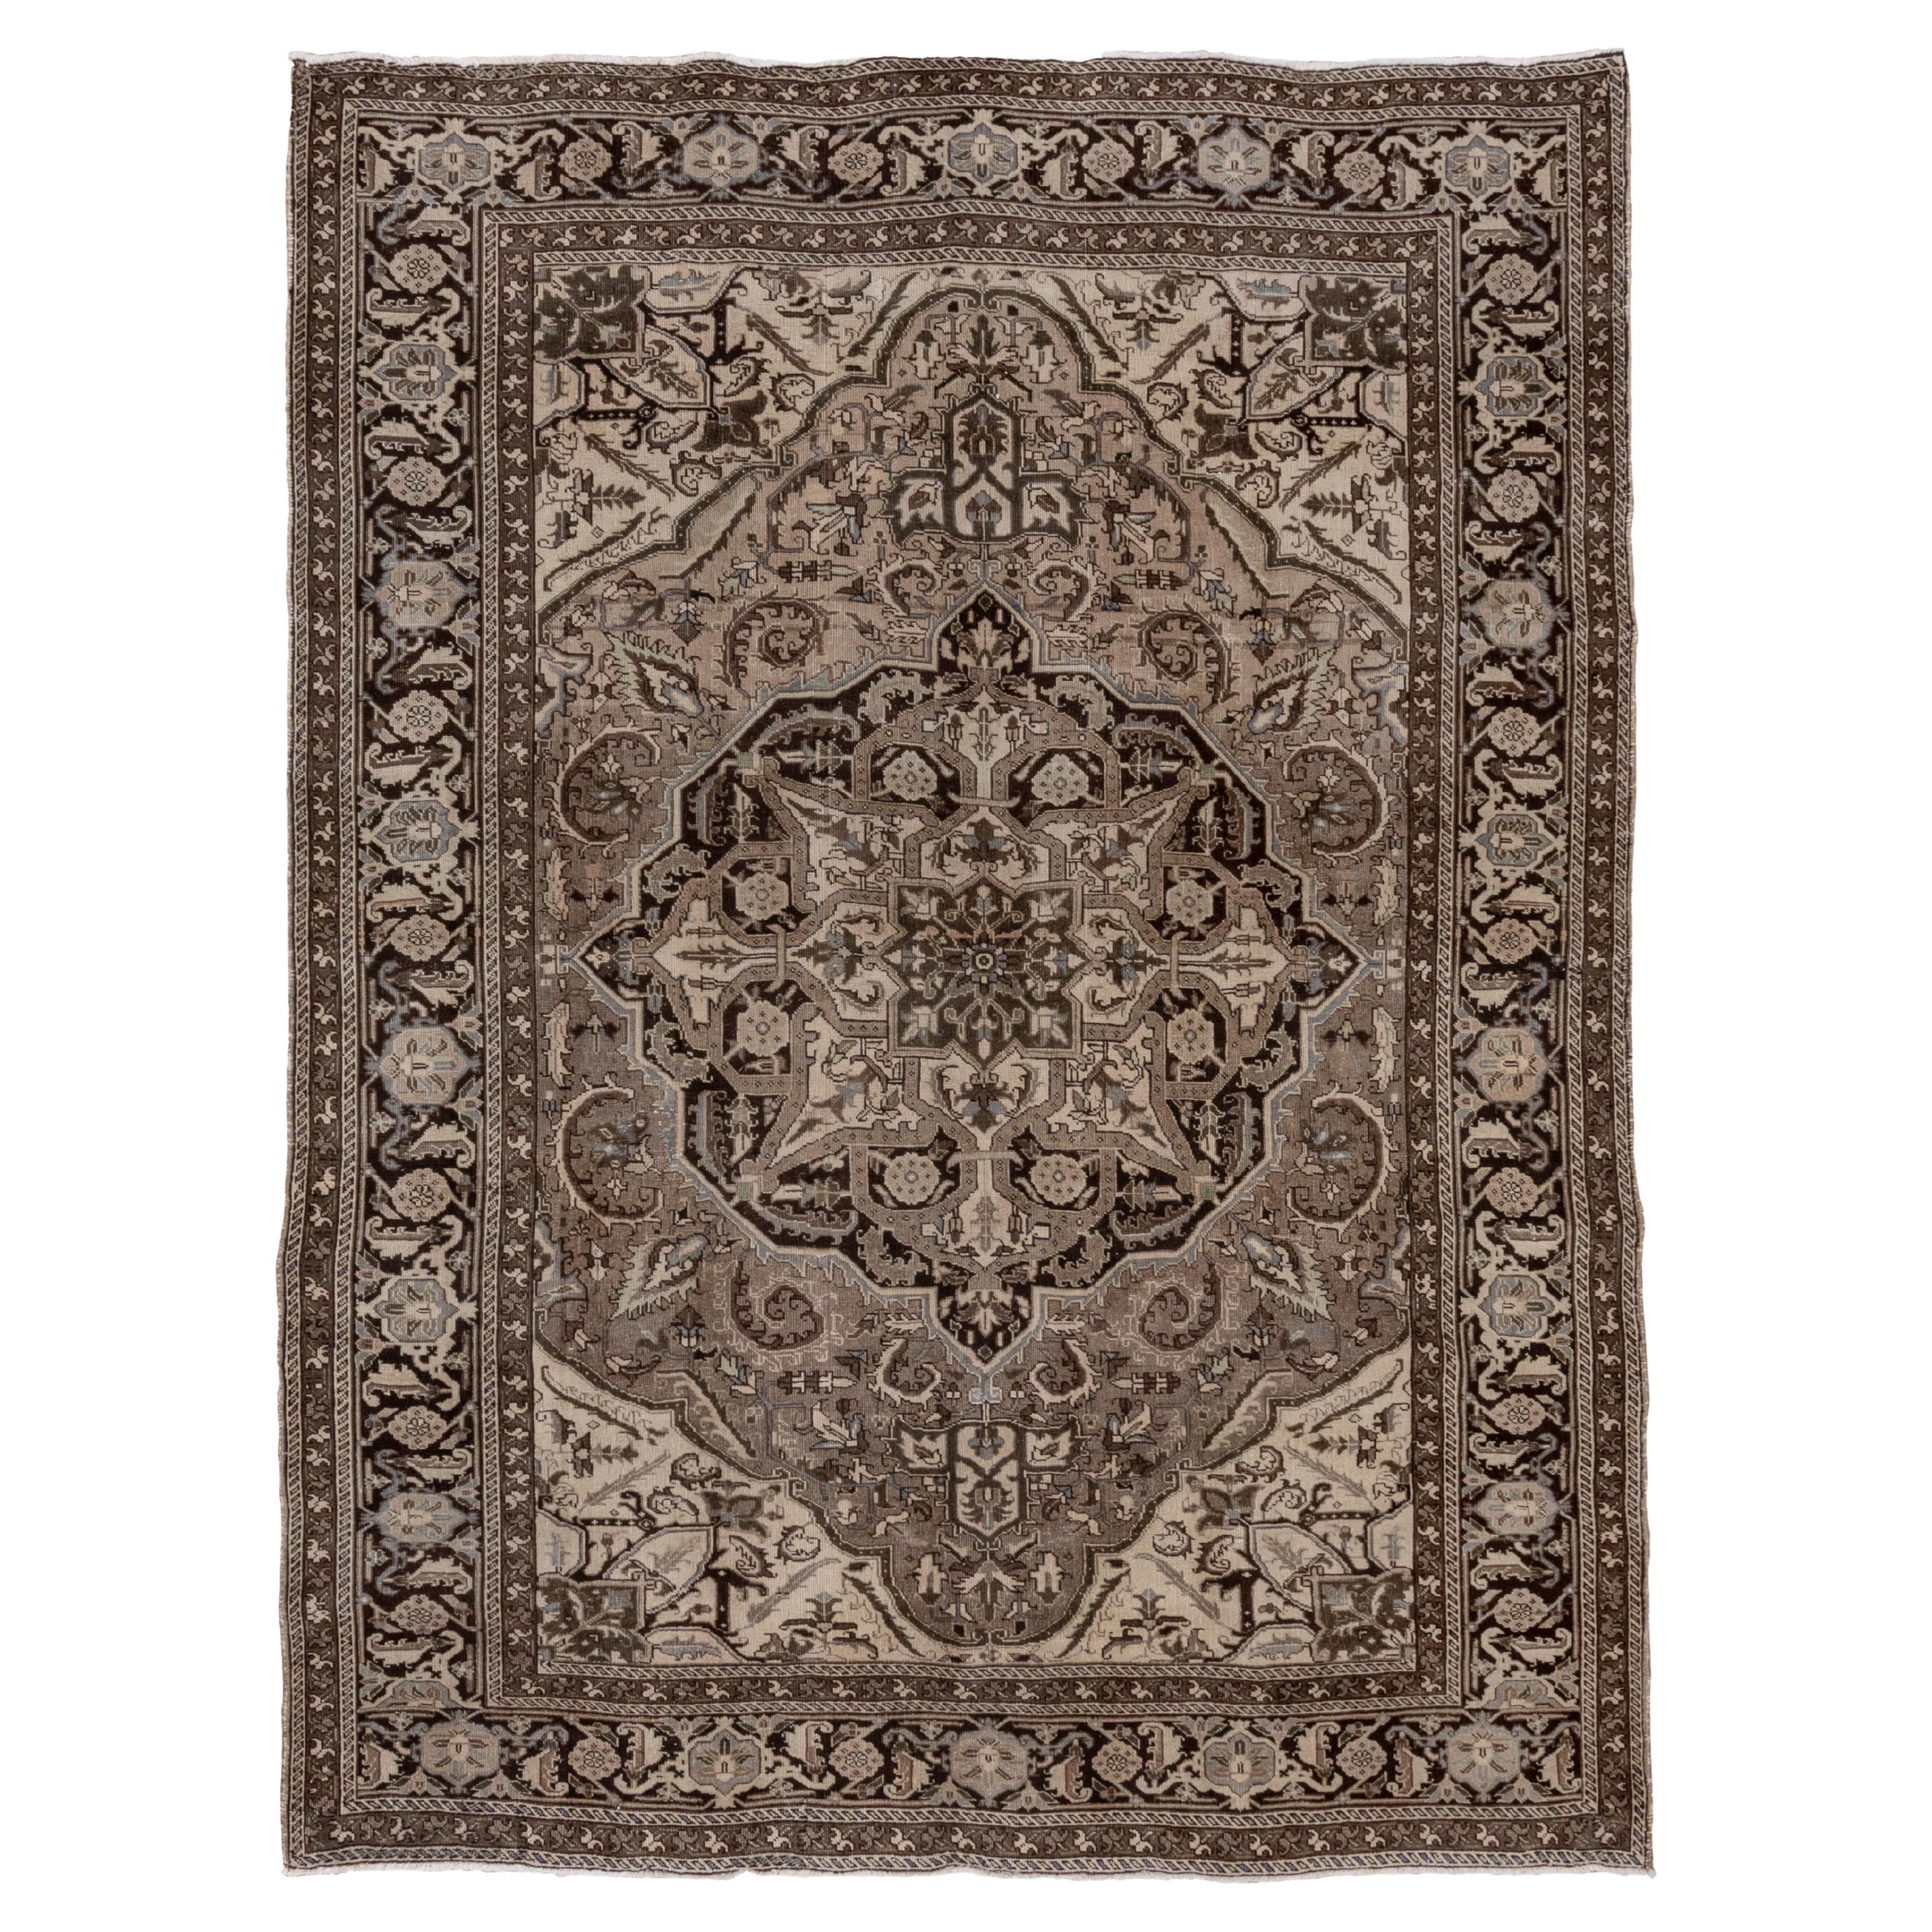 Antique Brown Heriz Rug with Gray Accents, Circa 1930s For Sale